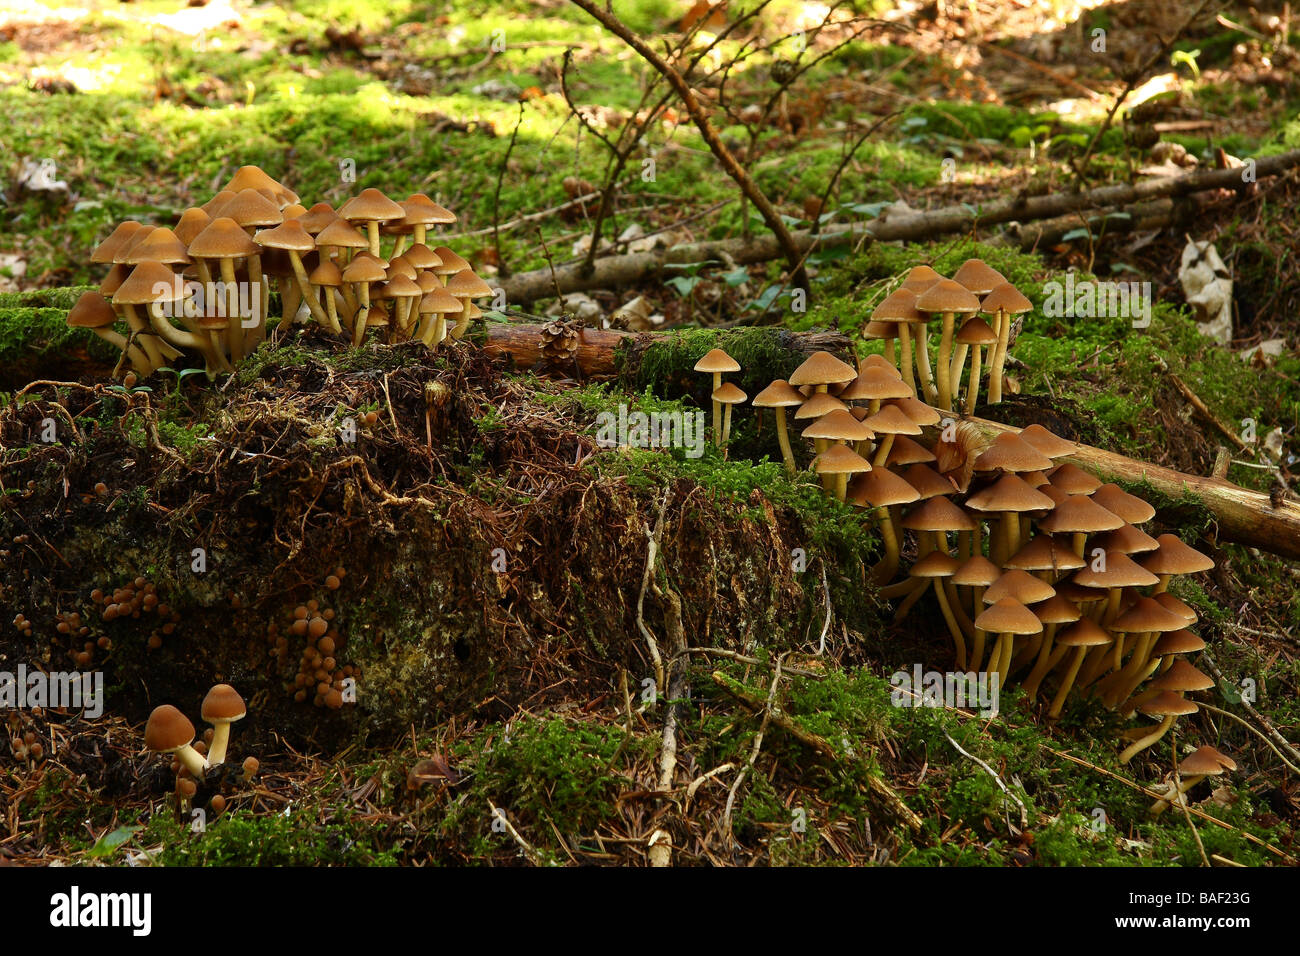 Several large clumps of Hypholoma capnoides fungi on an old tree stump Limousin France Stock Photo